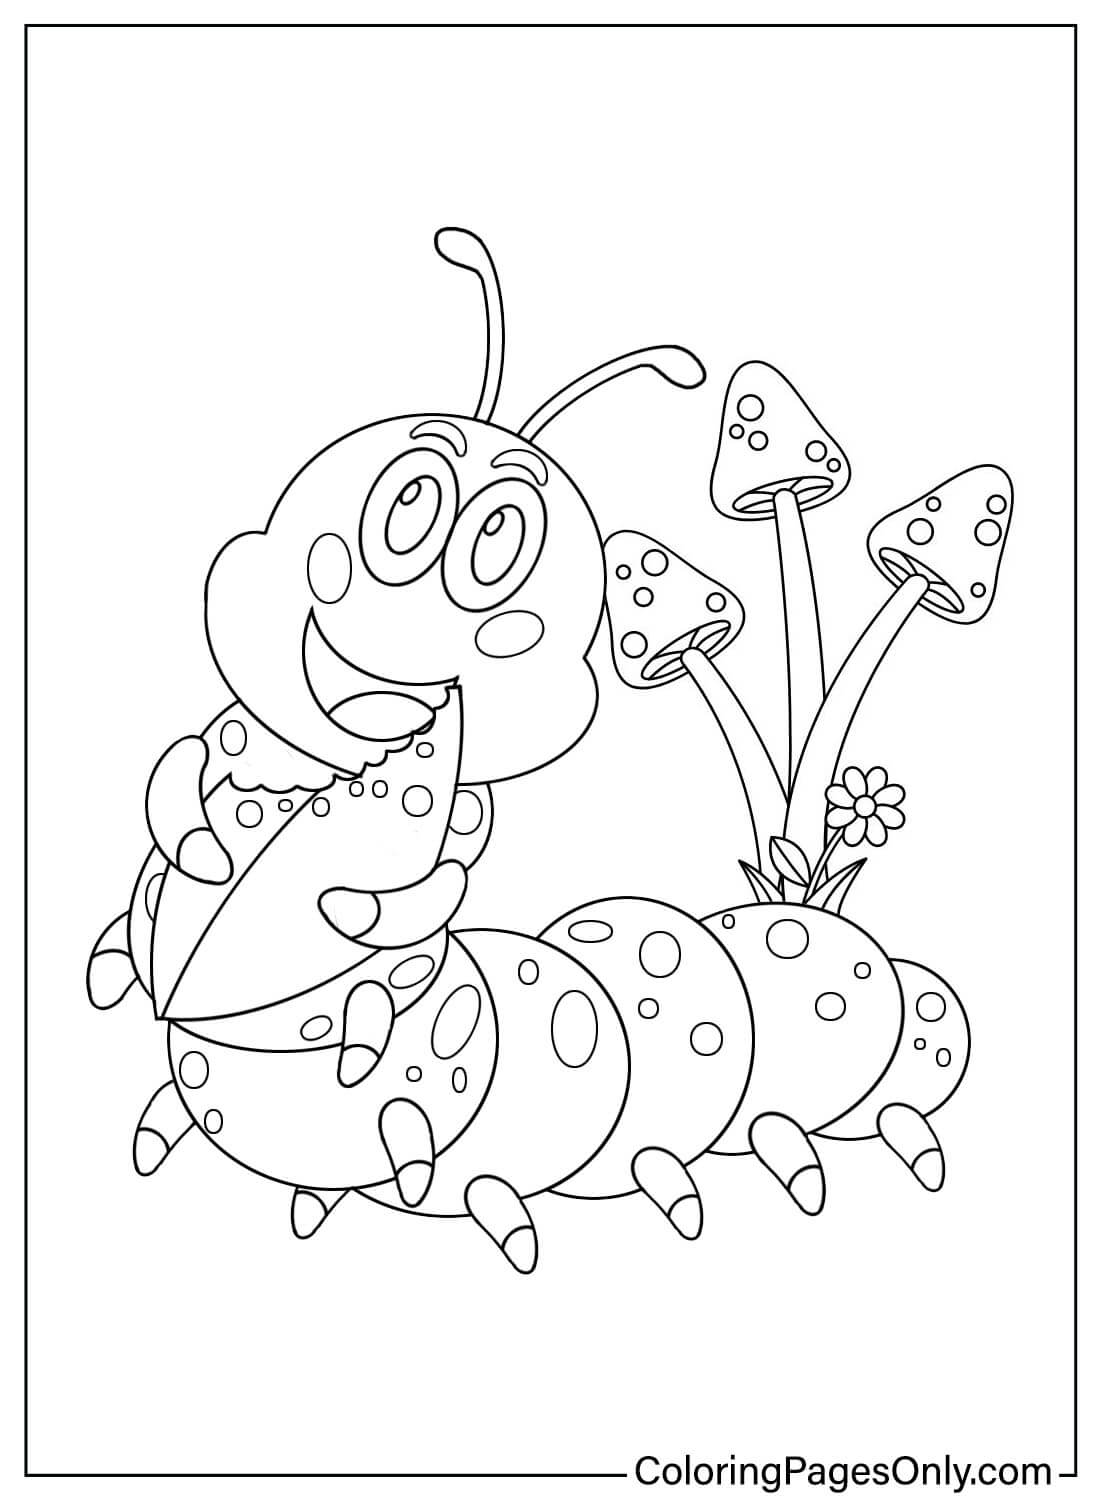 Caterpillar Coloring Page For Kids from Caterpillar